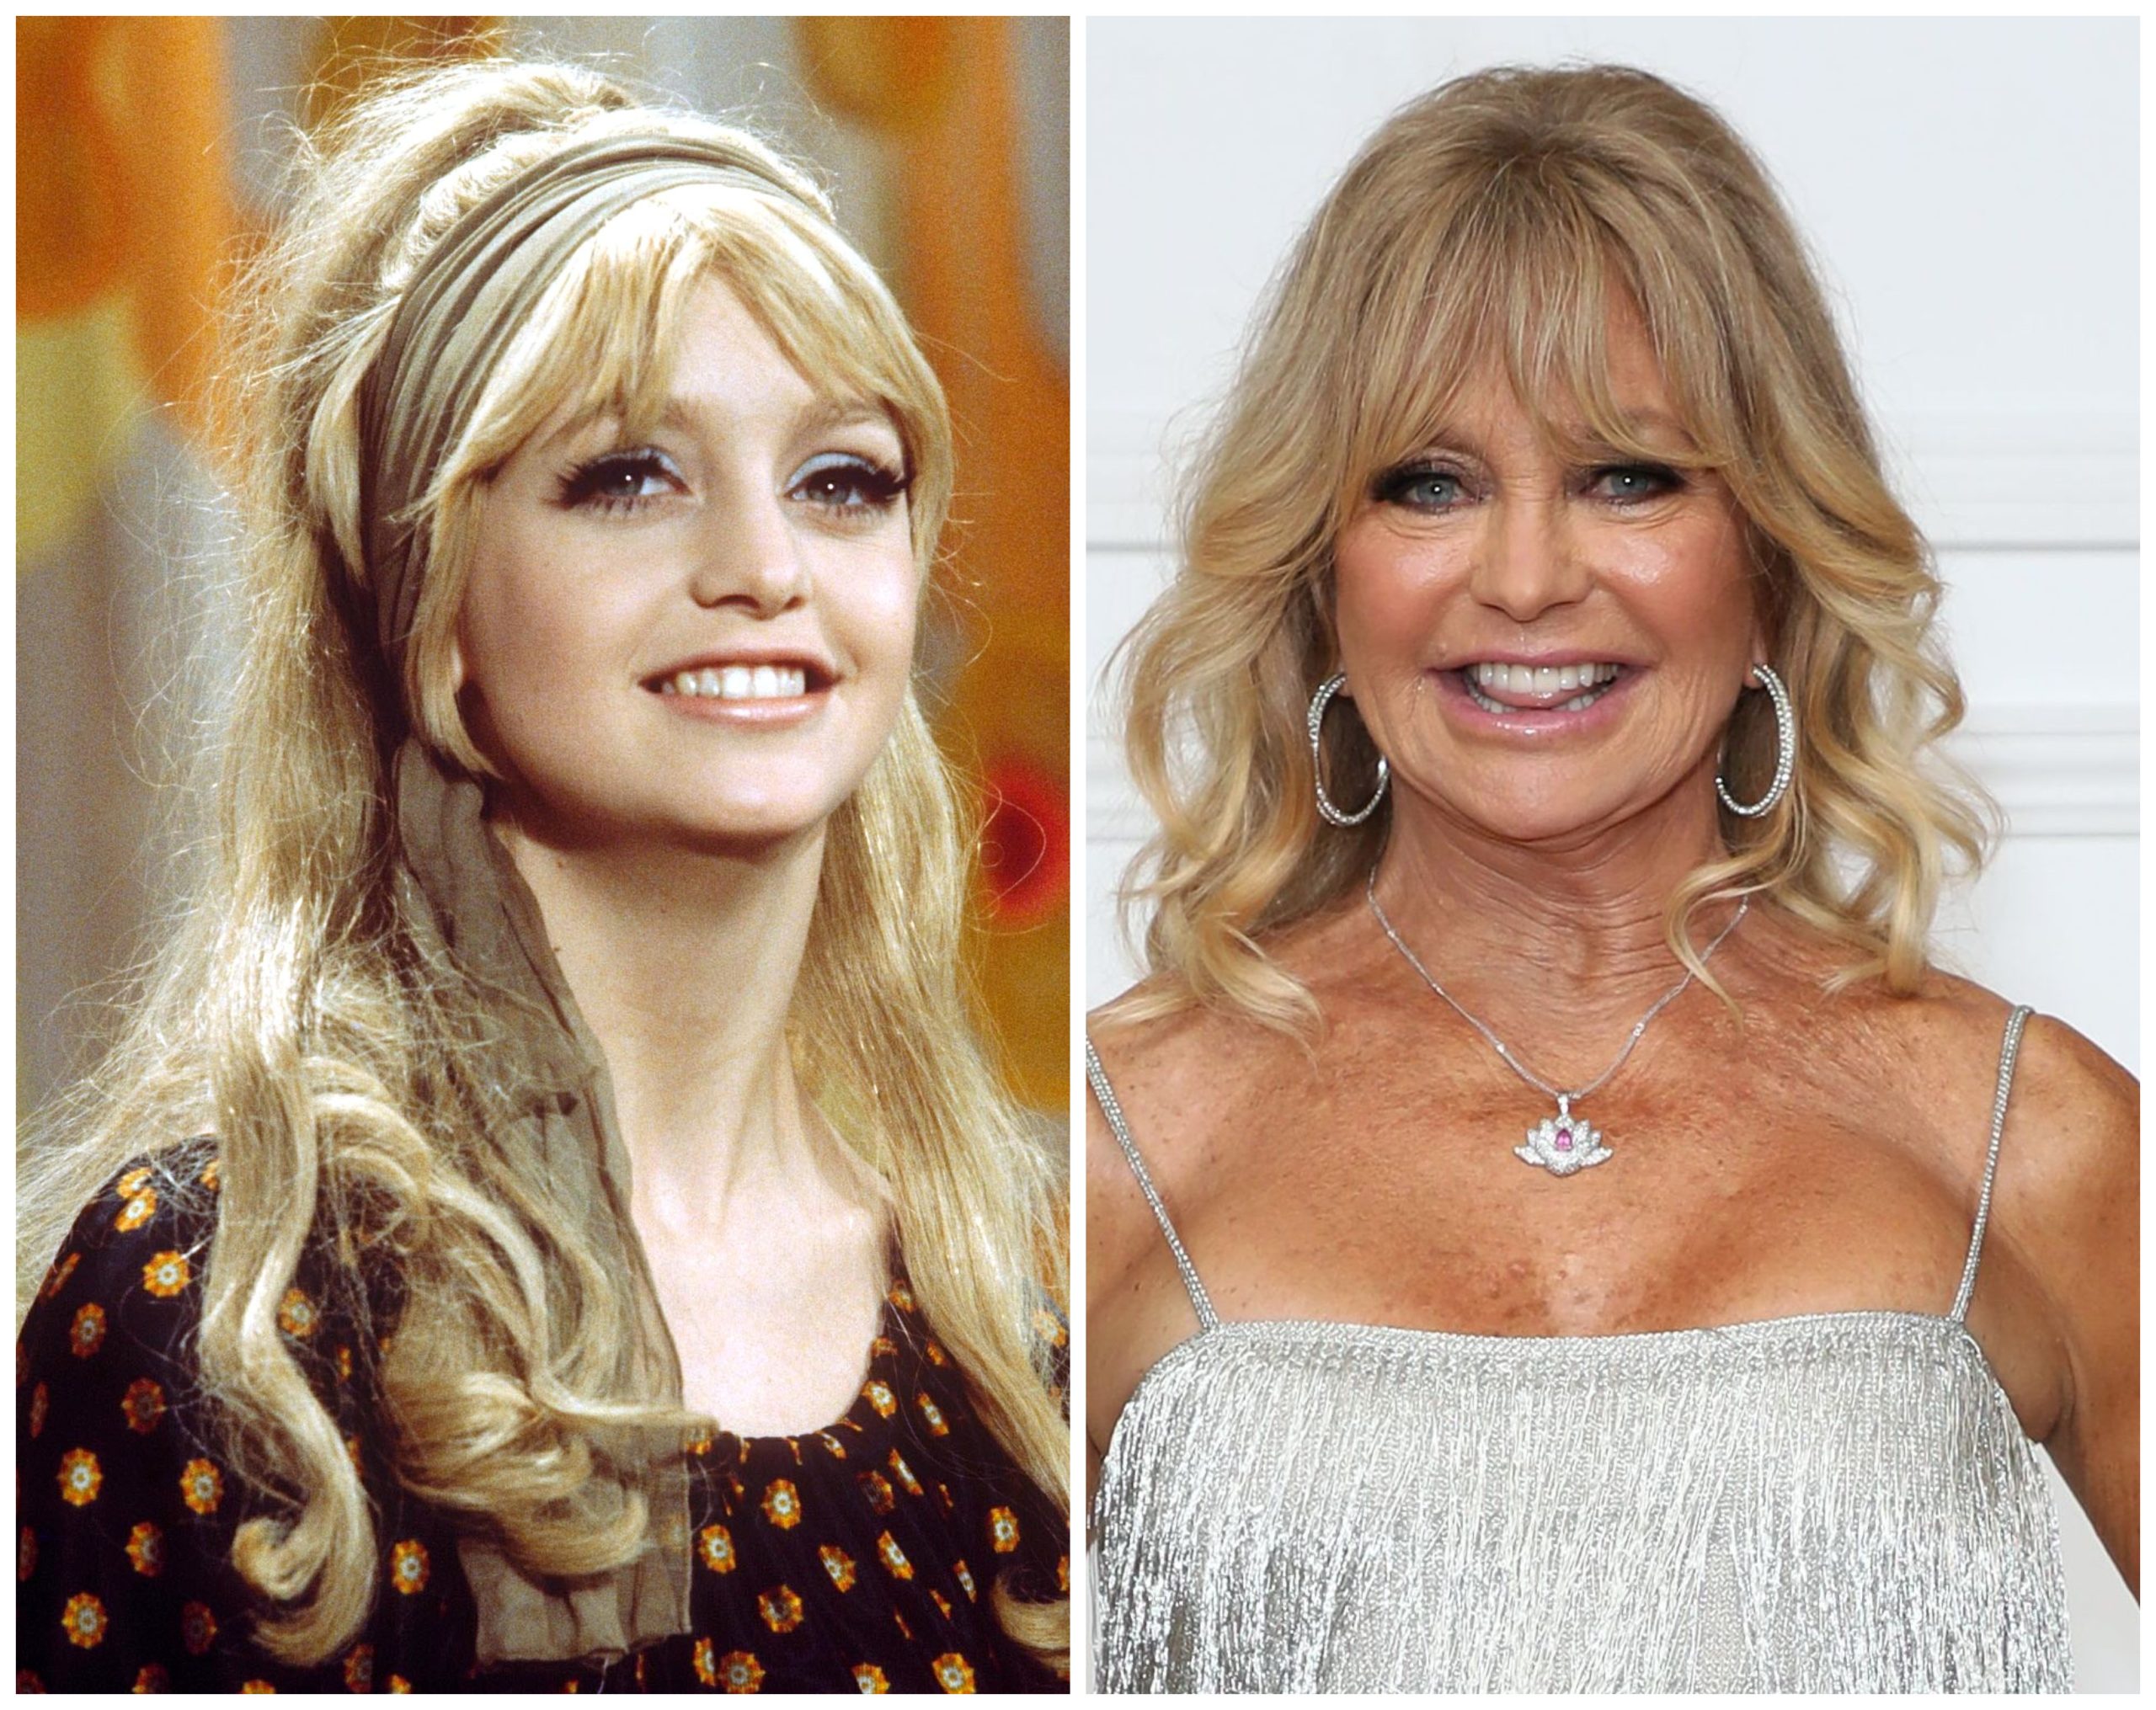 Goldie Hawn Wiki, Bio, Age, Net Worth, and Other Facts